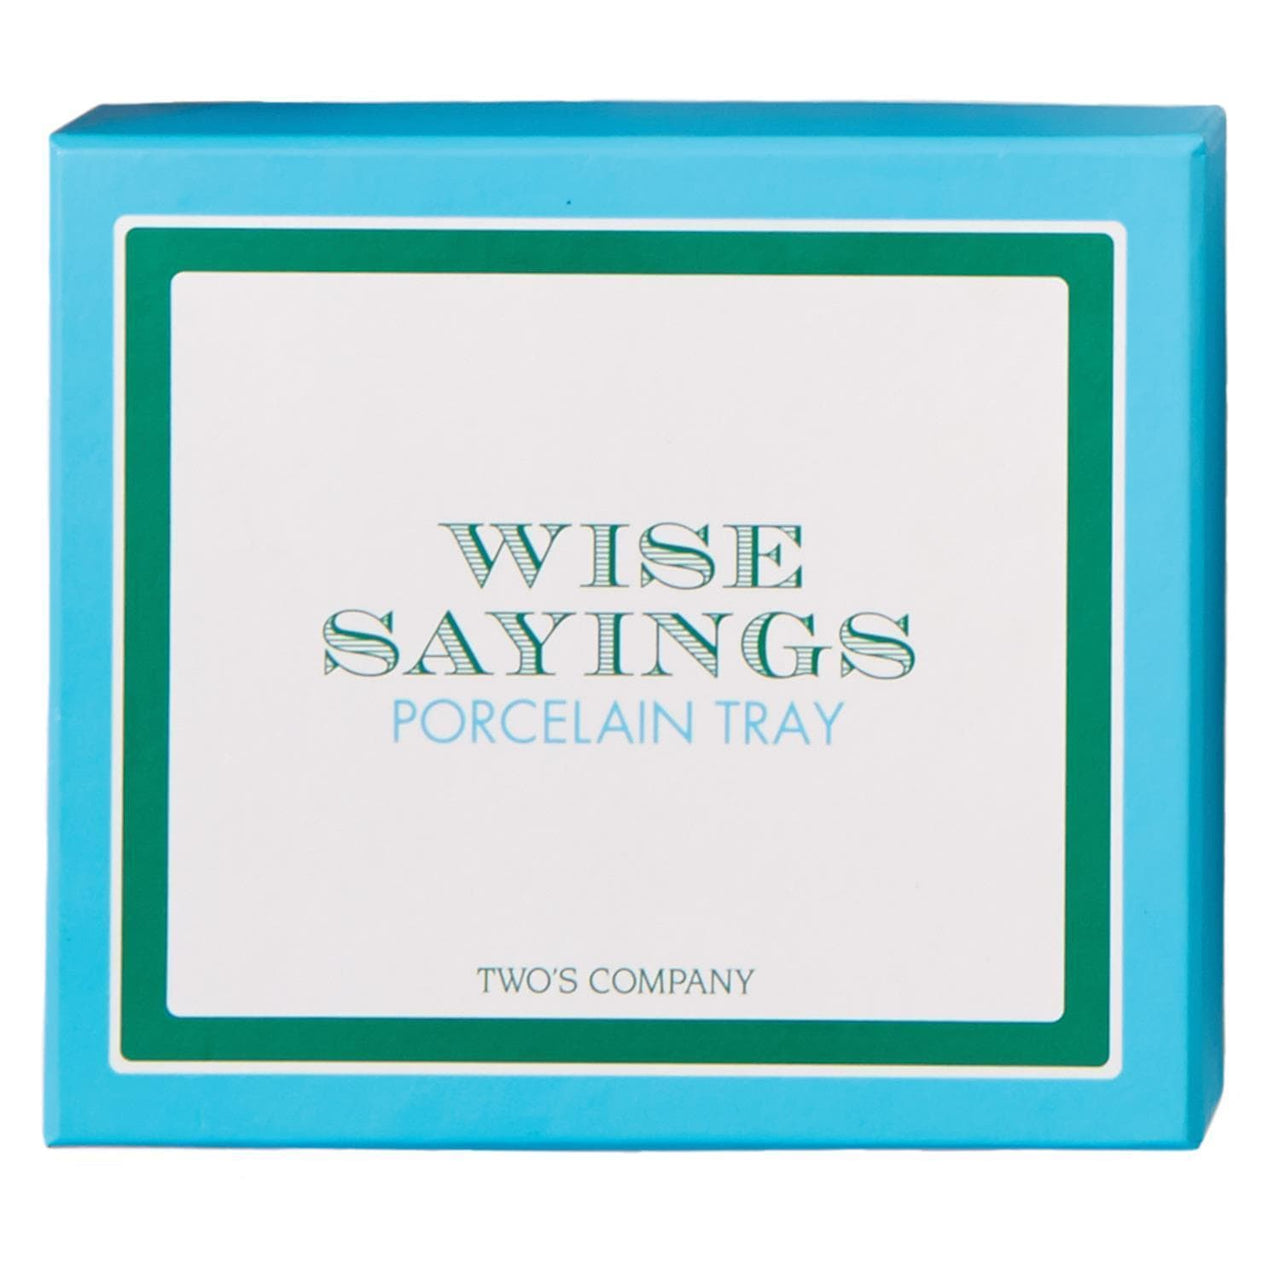 Wise Sayings Porcelain Tray - Girl's Best Friend Two's Company trinket tray